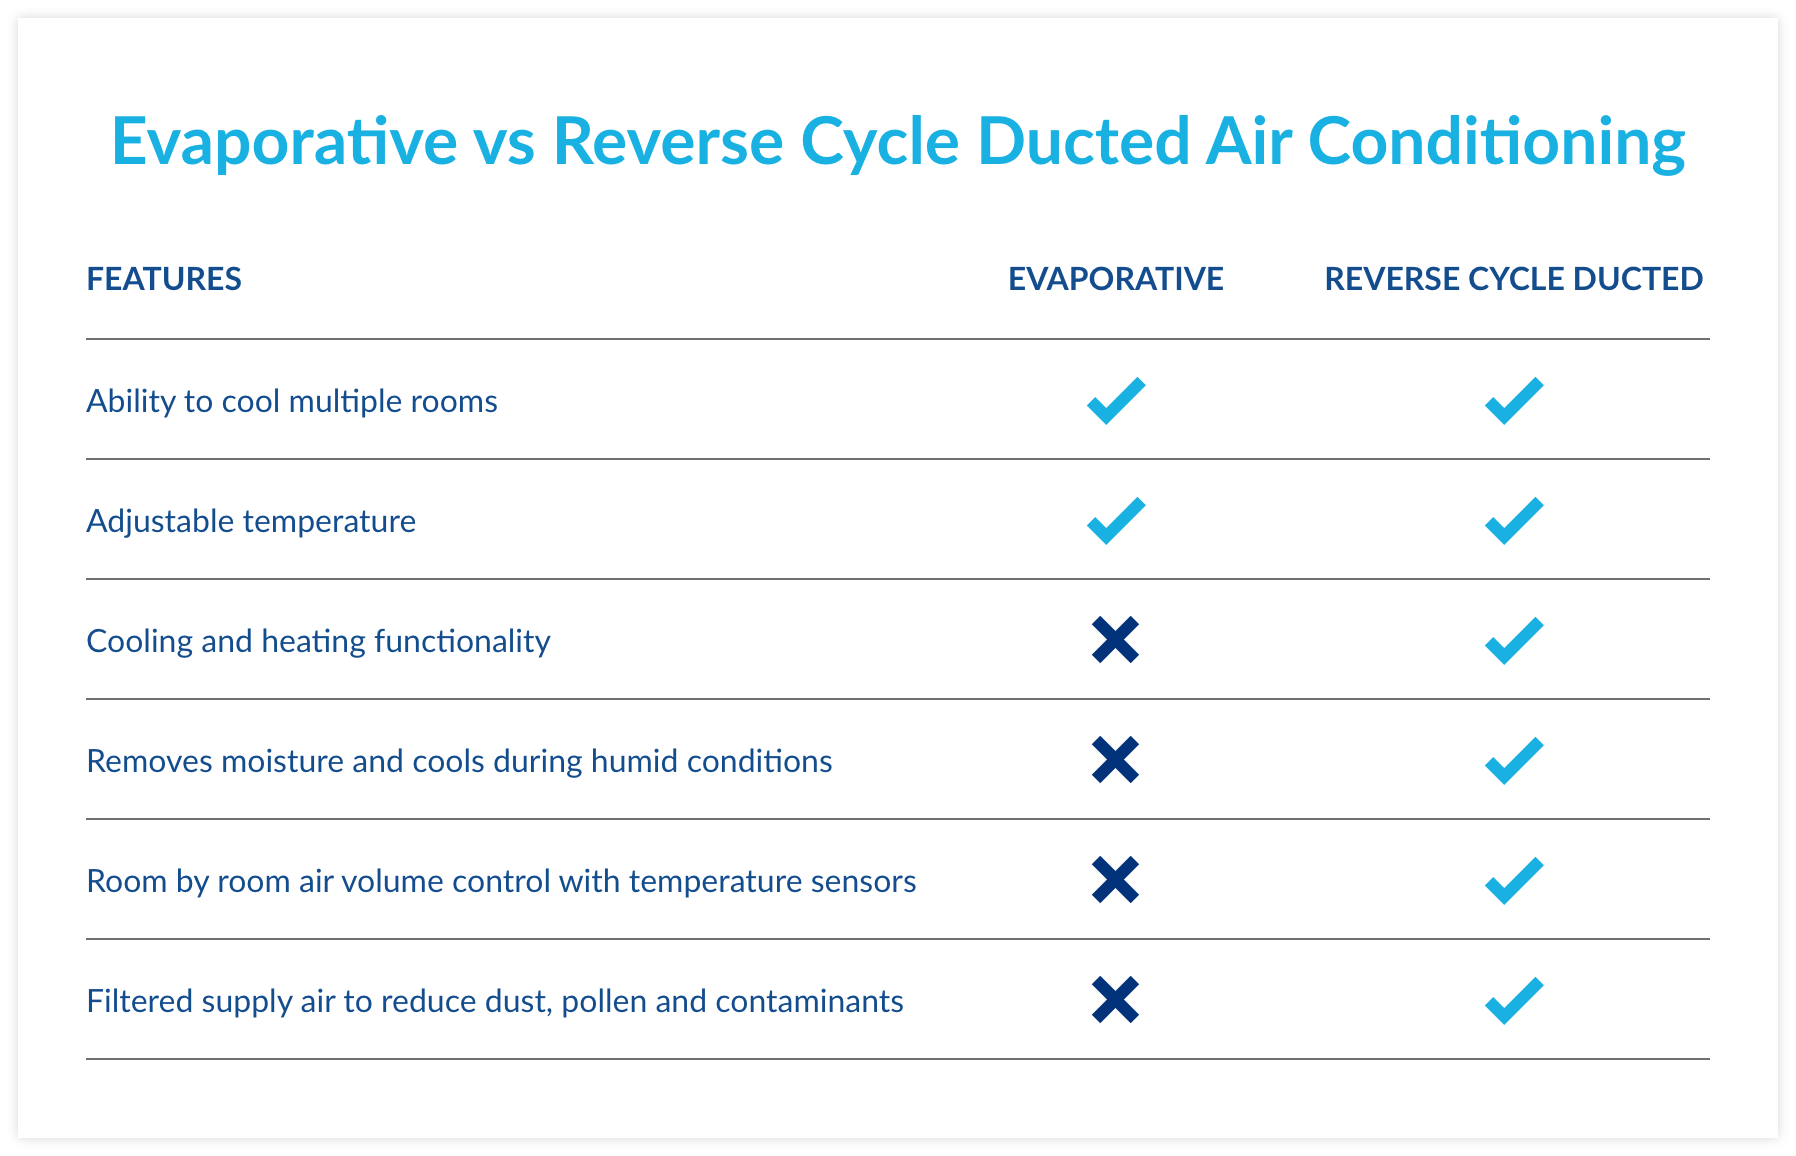 Evaporative vs Reverse Cycle Ducted Air Conditioning